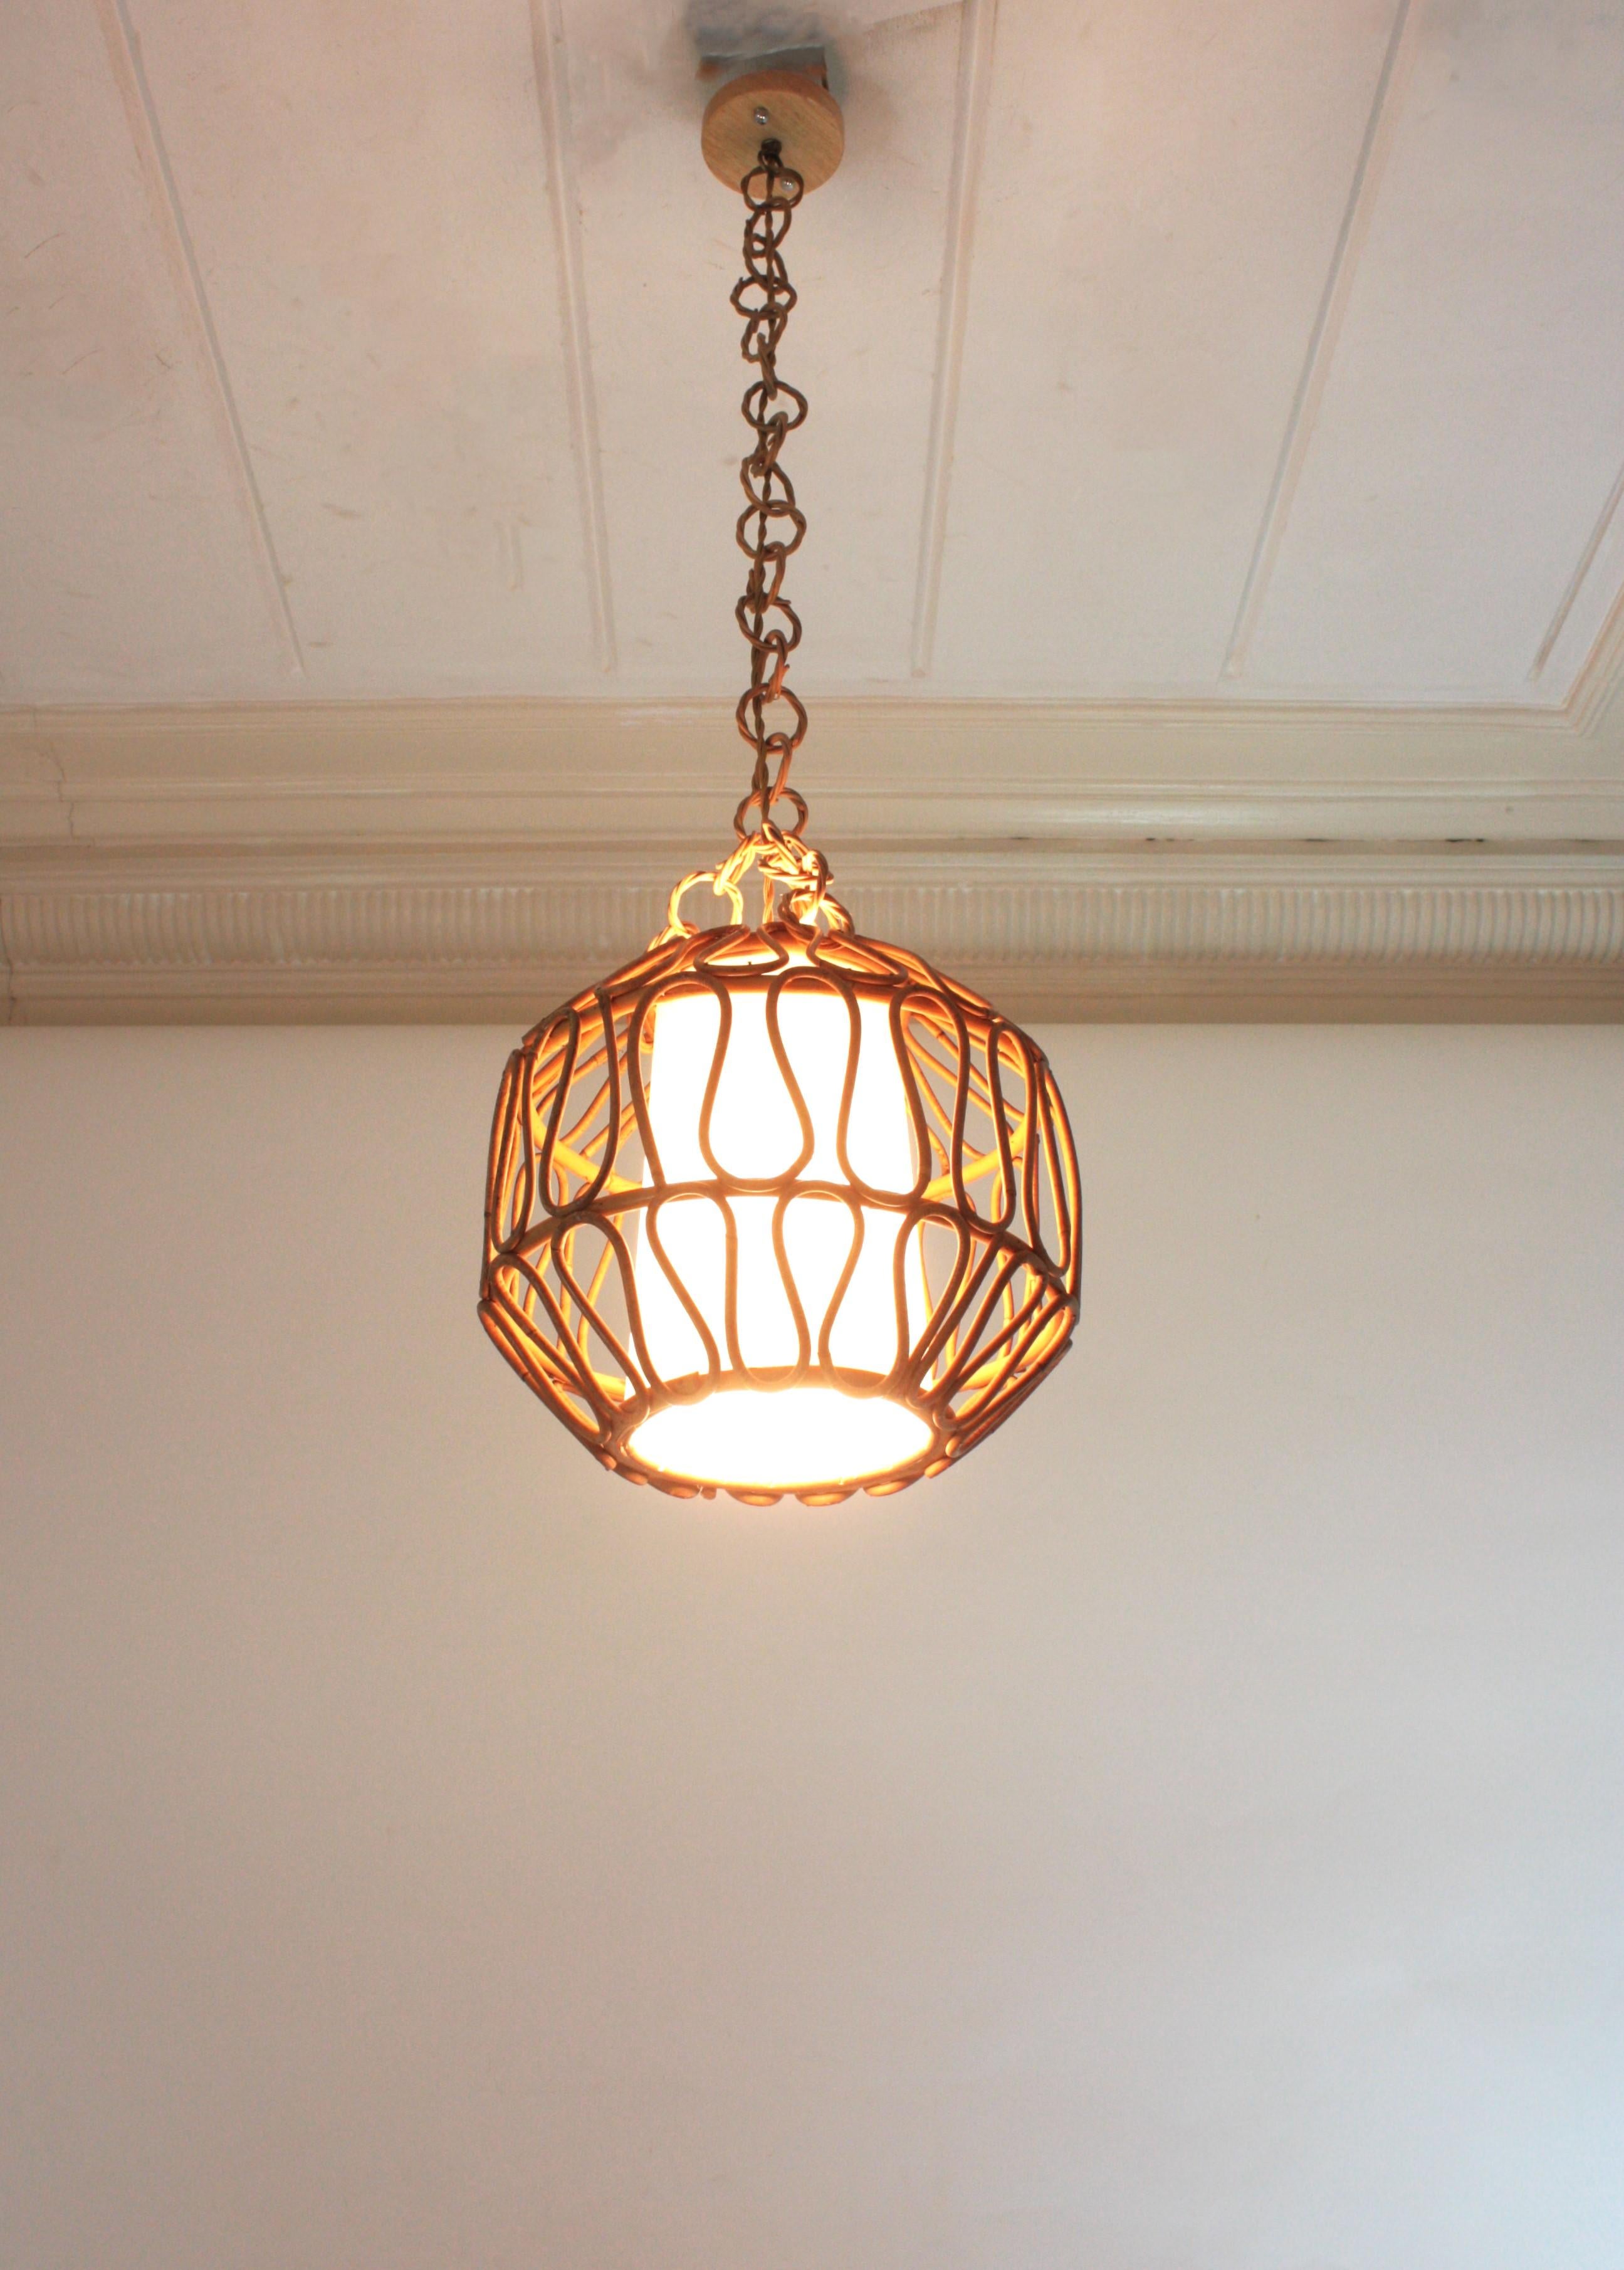 Rattan Globe Pendant Light or Lantern with Loop Details, Spain, 1960s For Sale 3